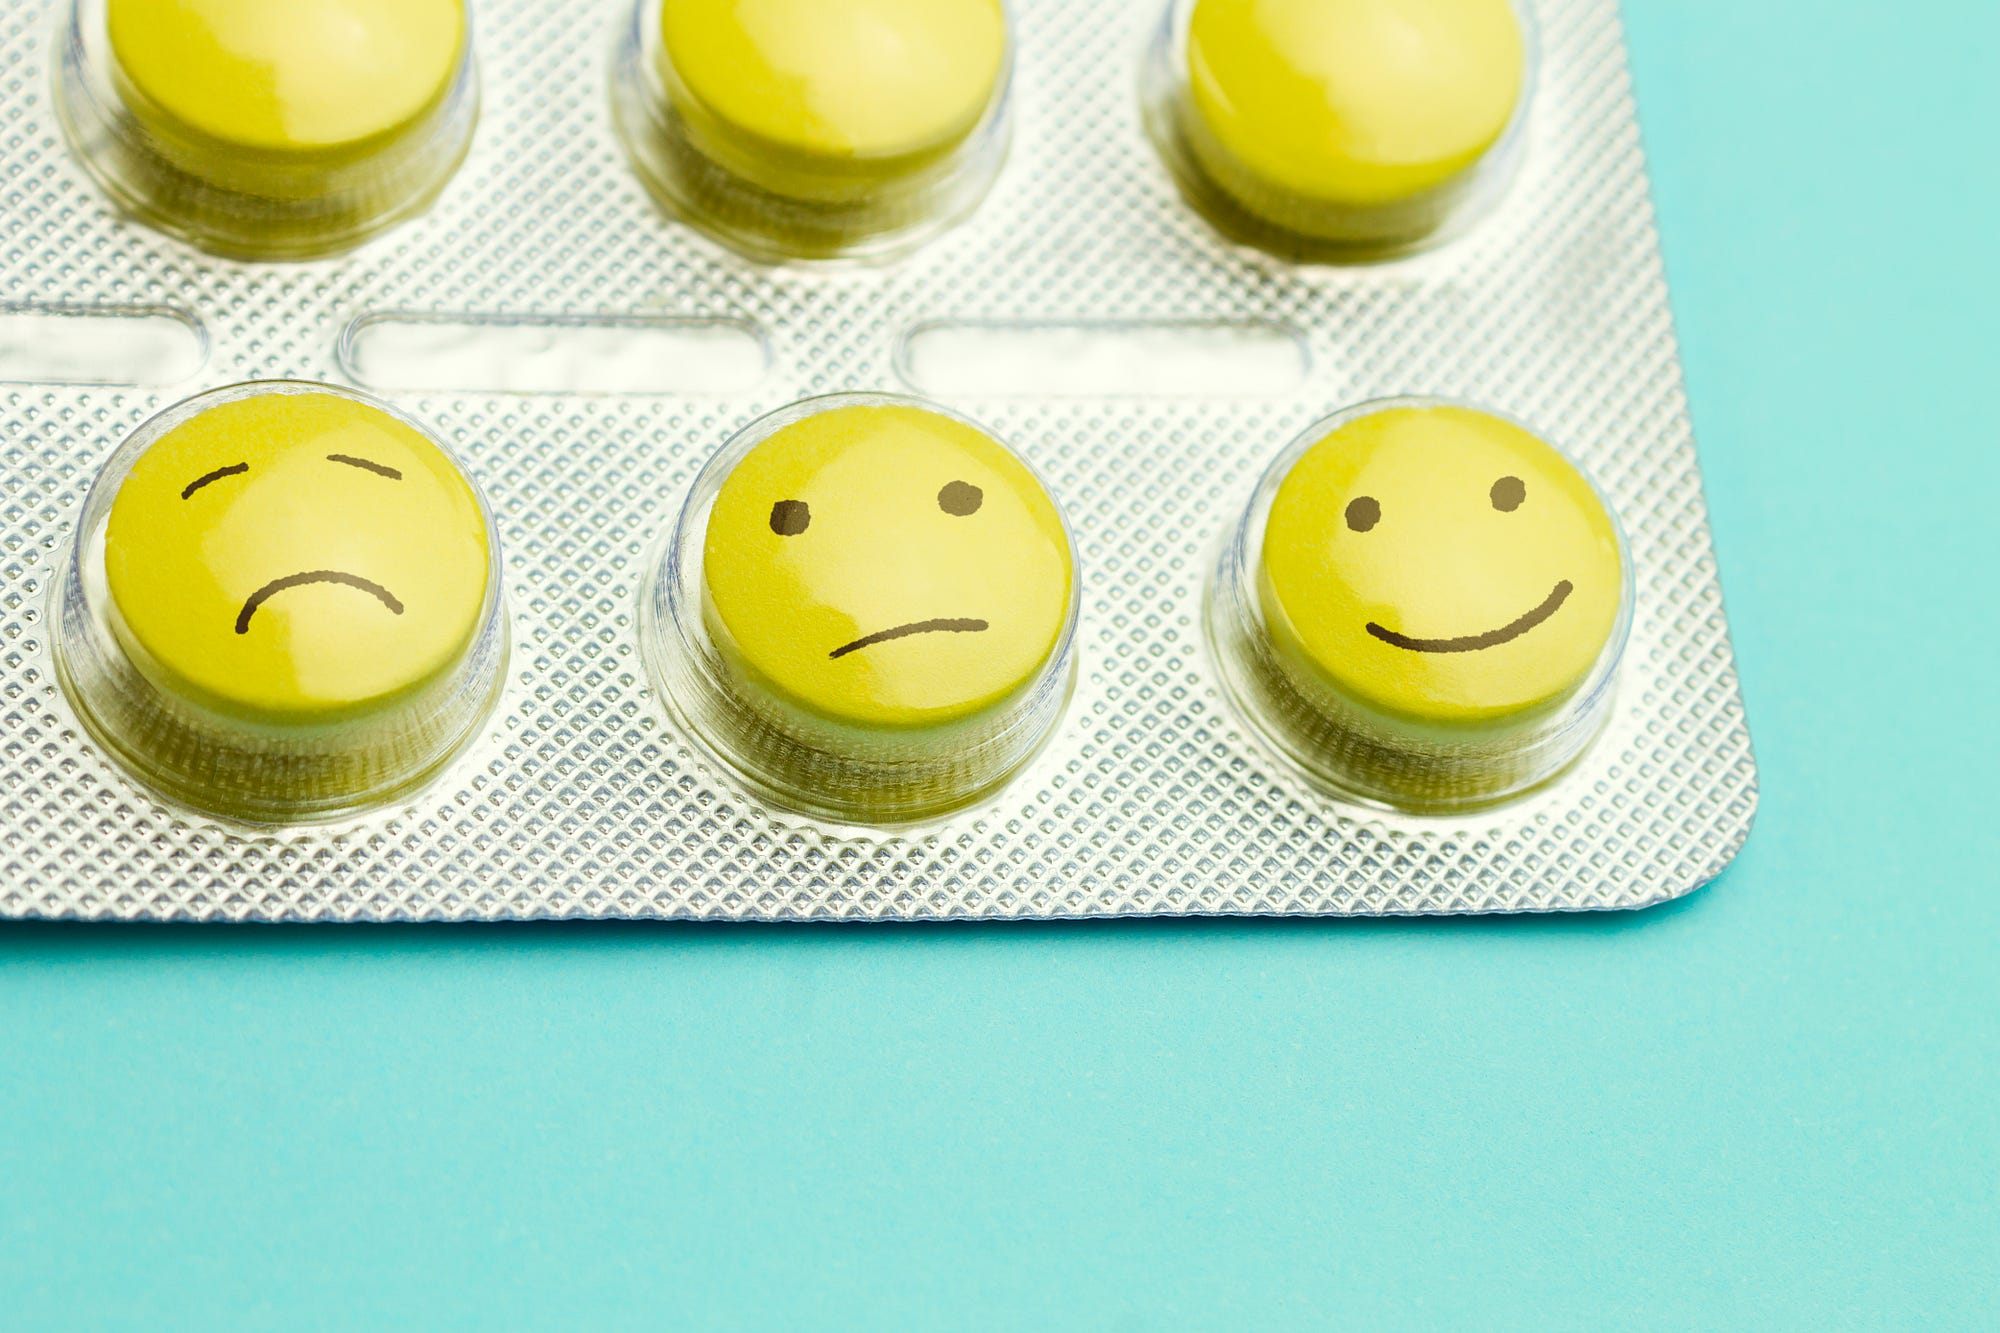 What It’s Like to Know You’ll Be on Antidepressants for Life